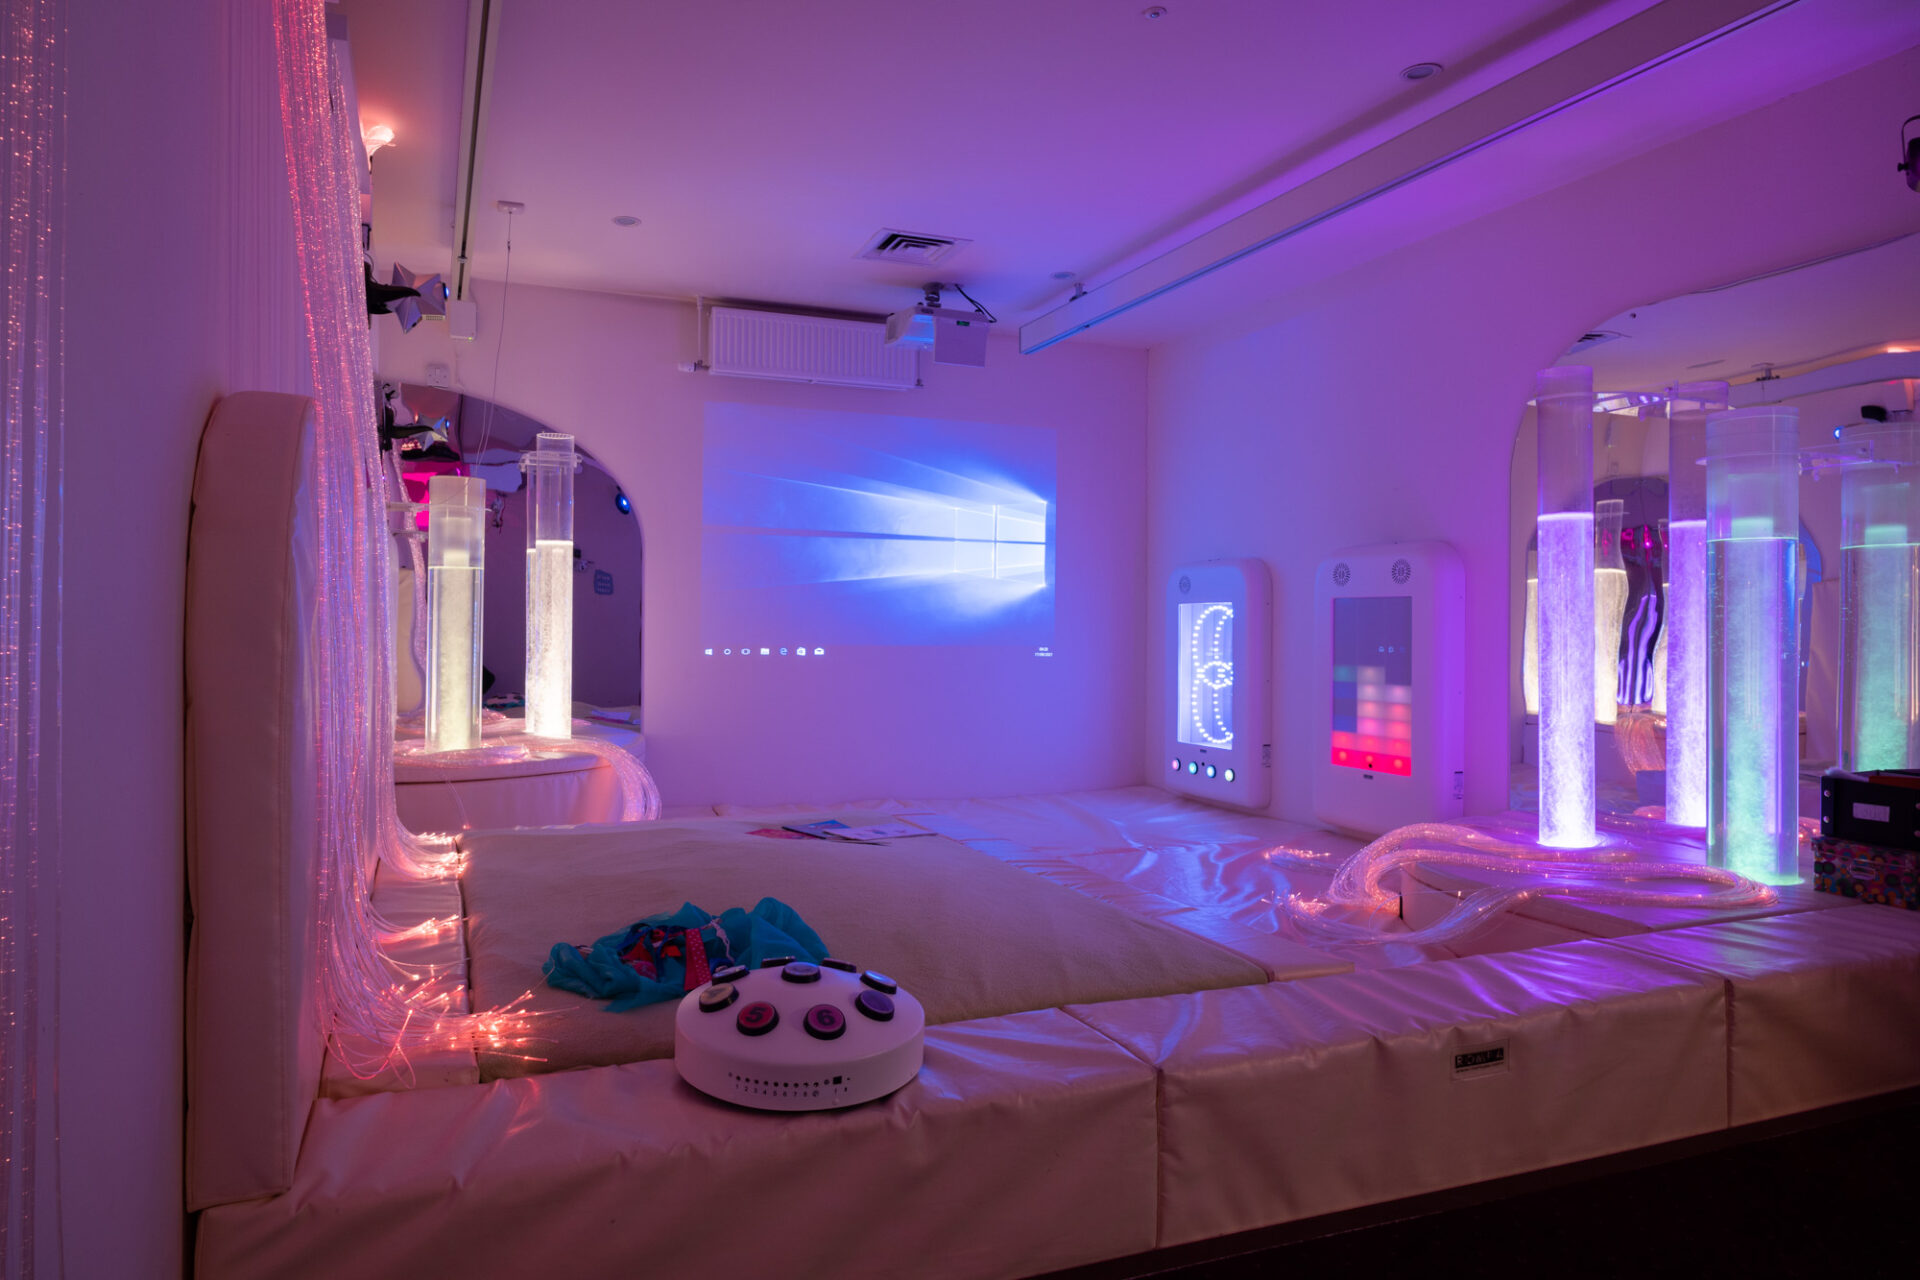 Multi-sensory room with blue lighting and bubble tube lights